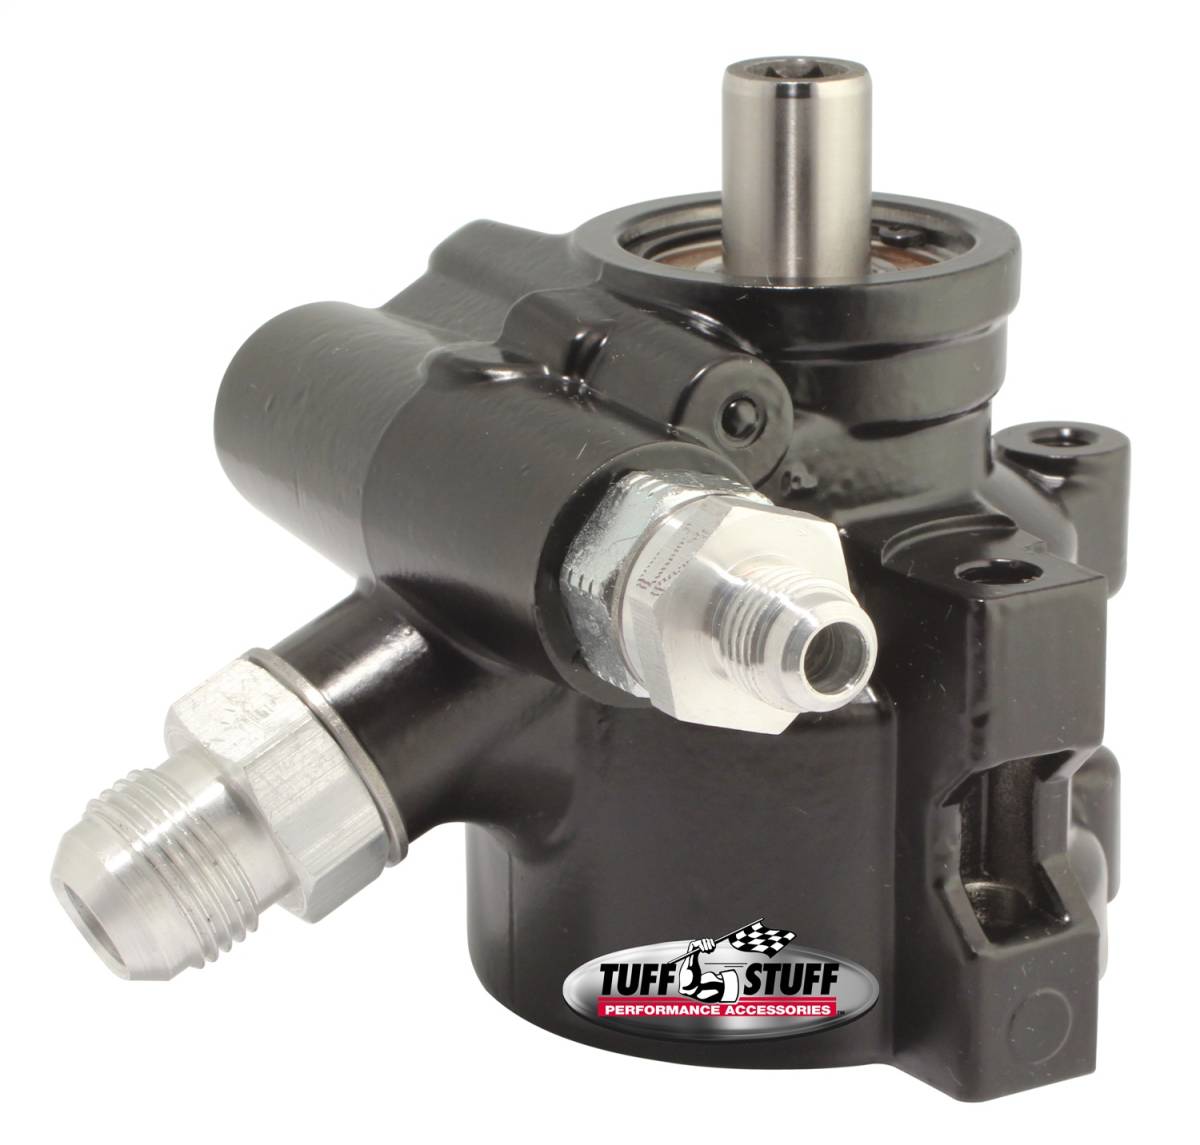 Tuff Stuff Performance - Type II Alum. Power Steering Pump An-6 And AN-10 Fittings M8x1.25 Threaded Hole Mounting Aluminum For Street Rods/Custom Vehicles w/Limited Engine Space Black 6175ALB-2